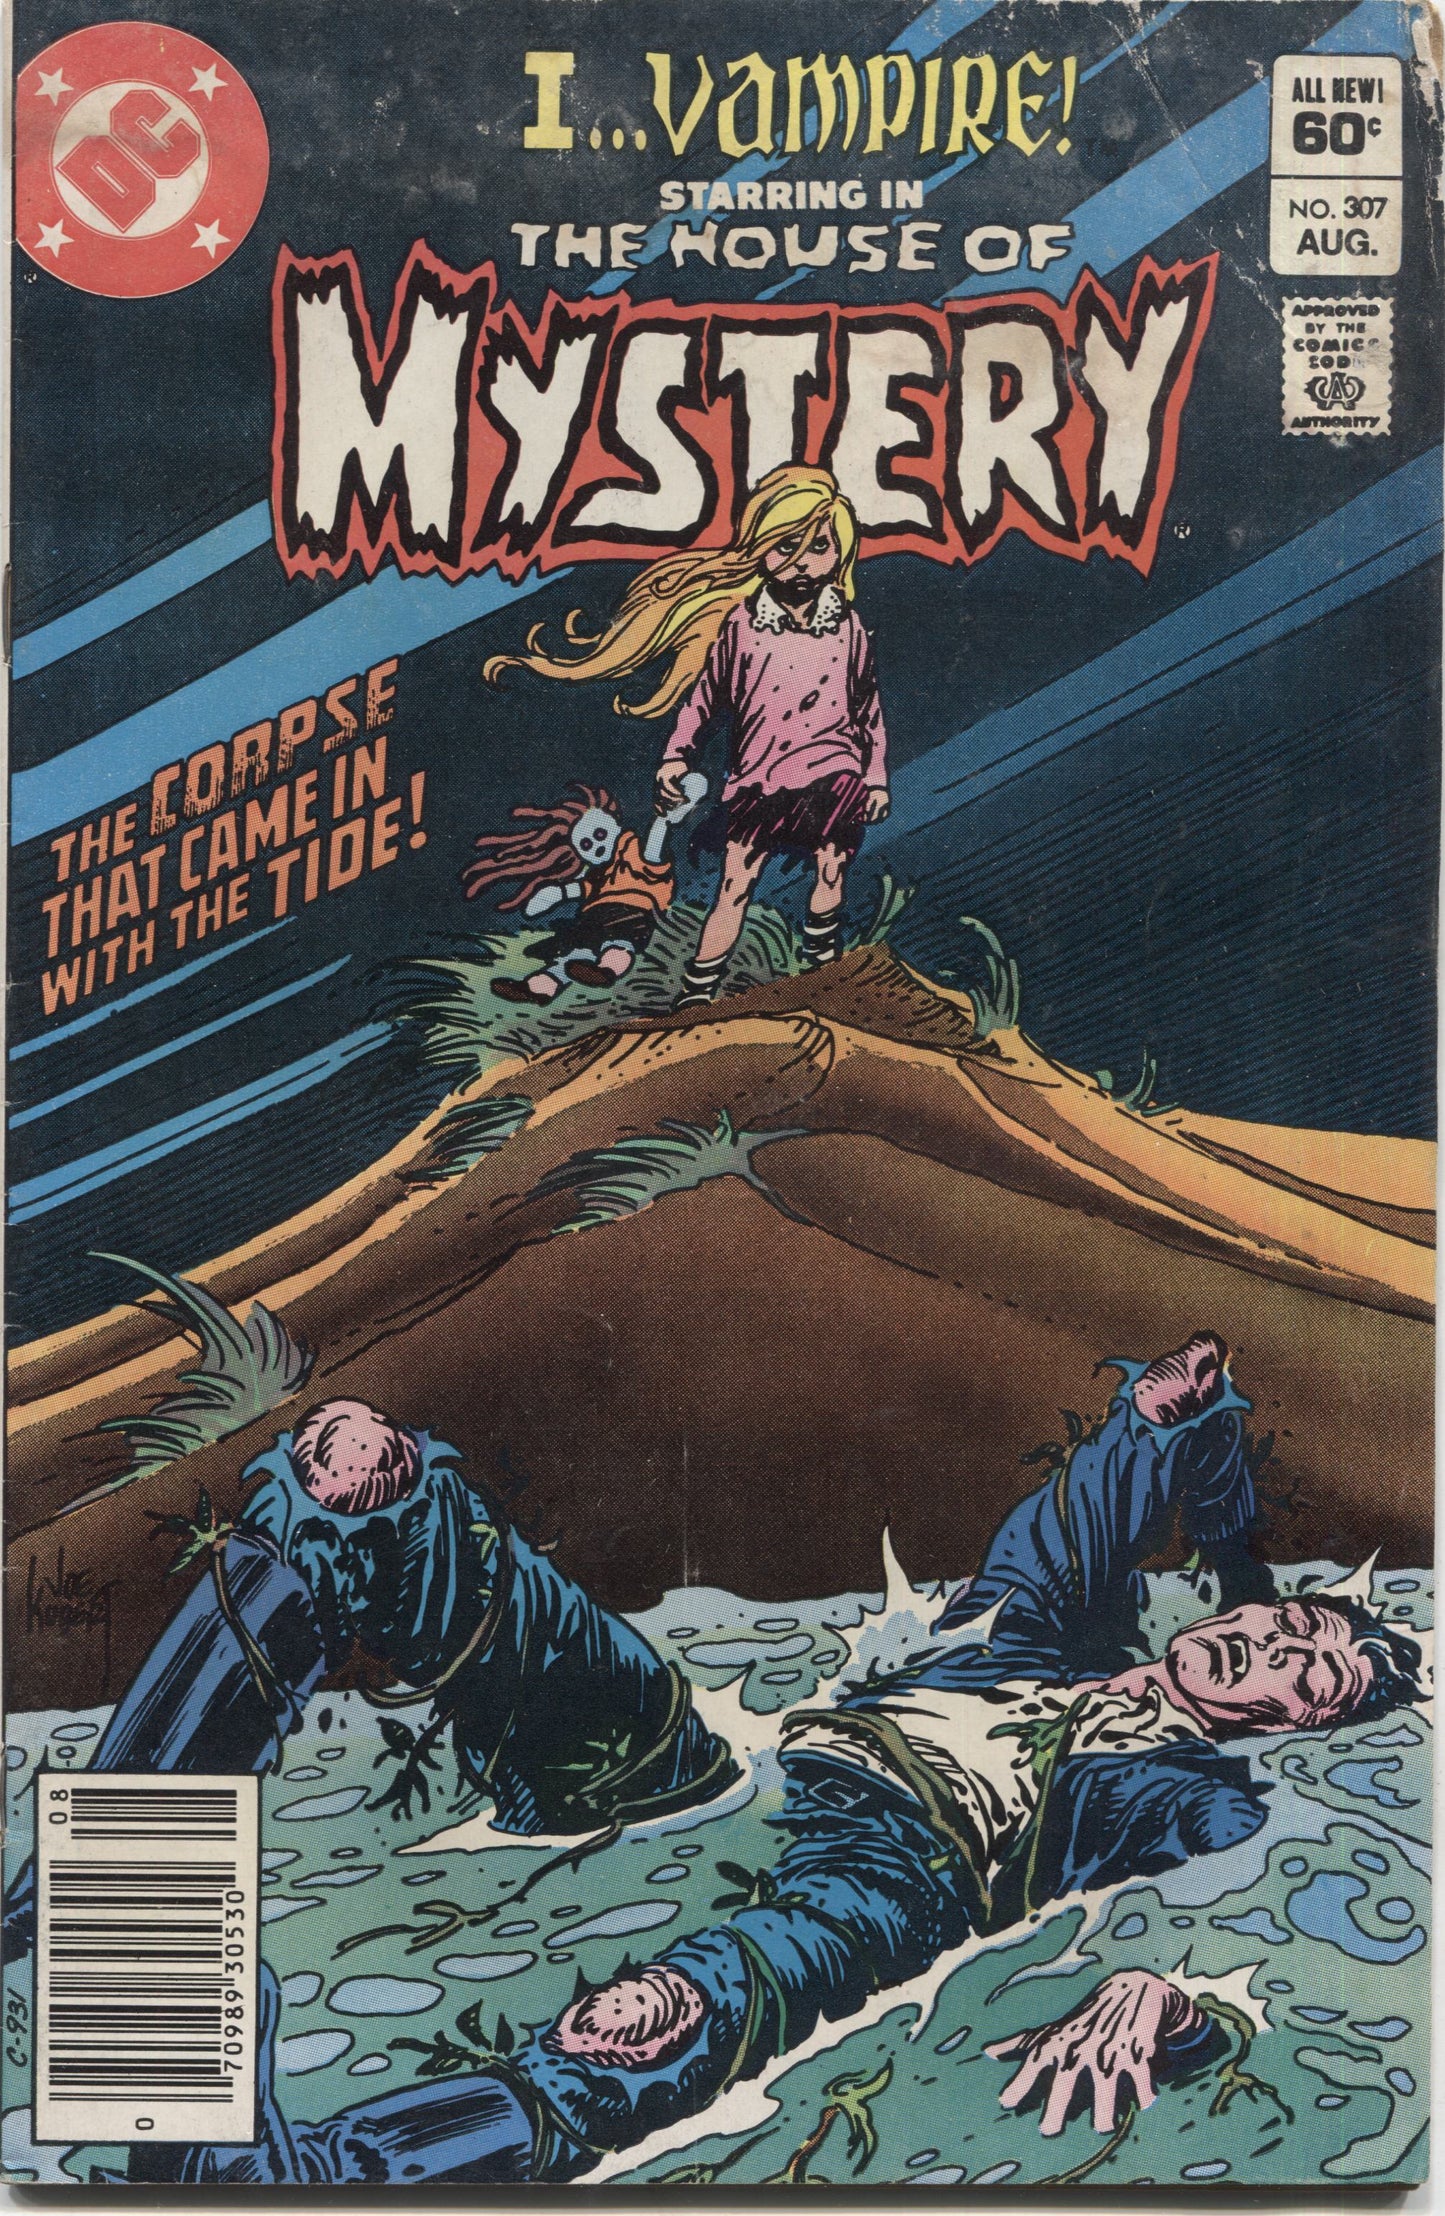 The House of Mystery No. 307, "The Corpse That Came in with the Tide," DC Comics, August 1982